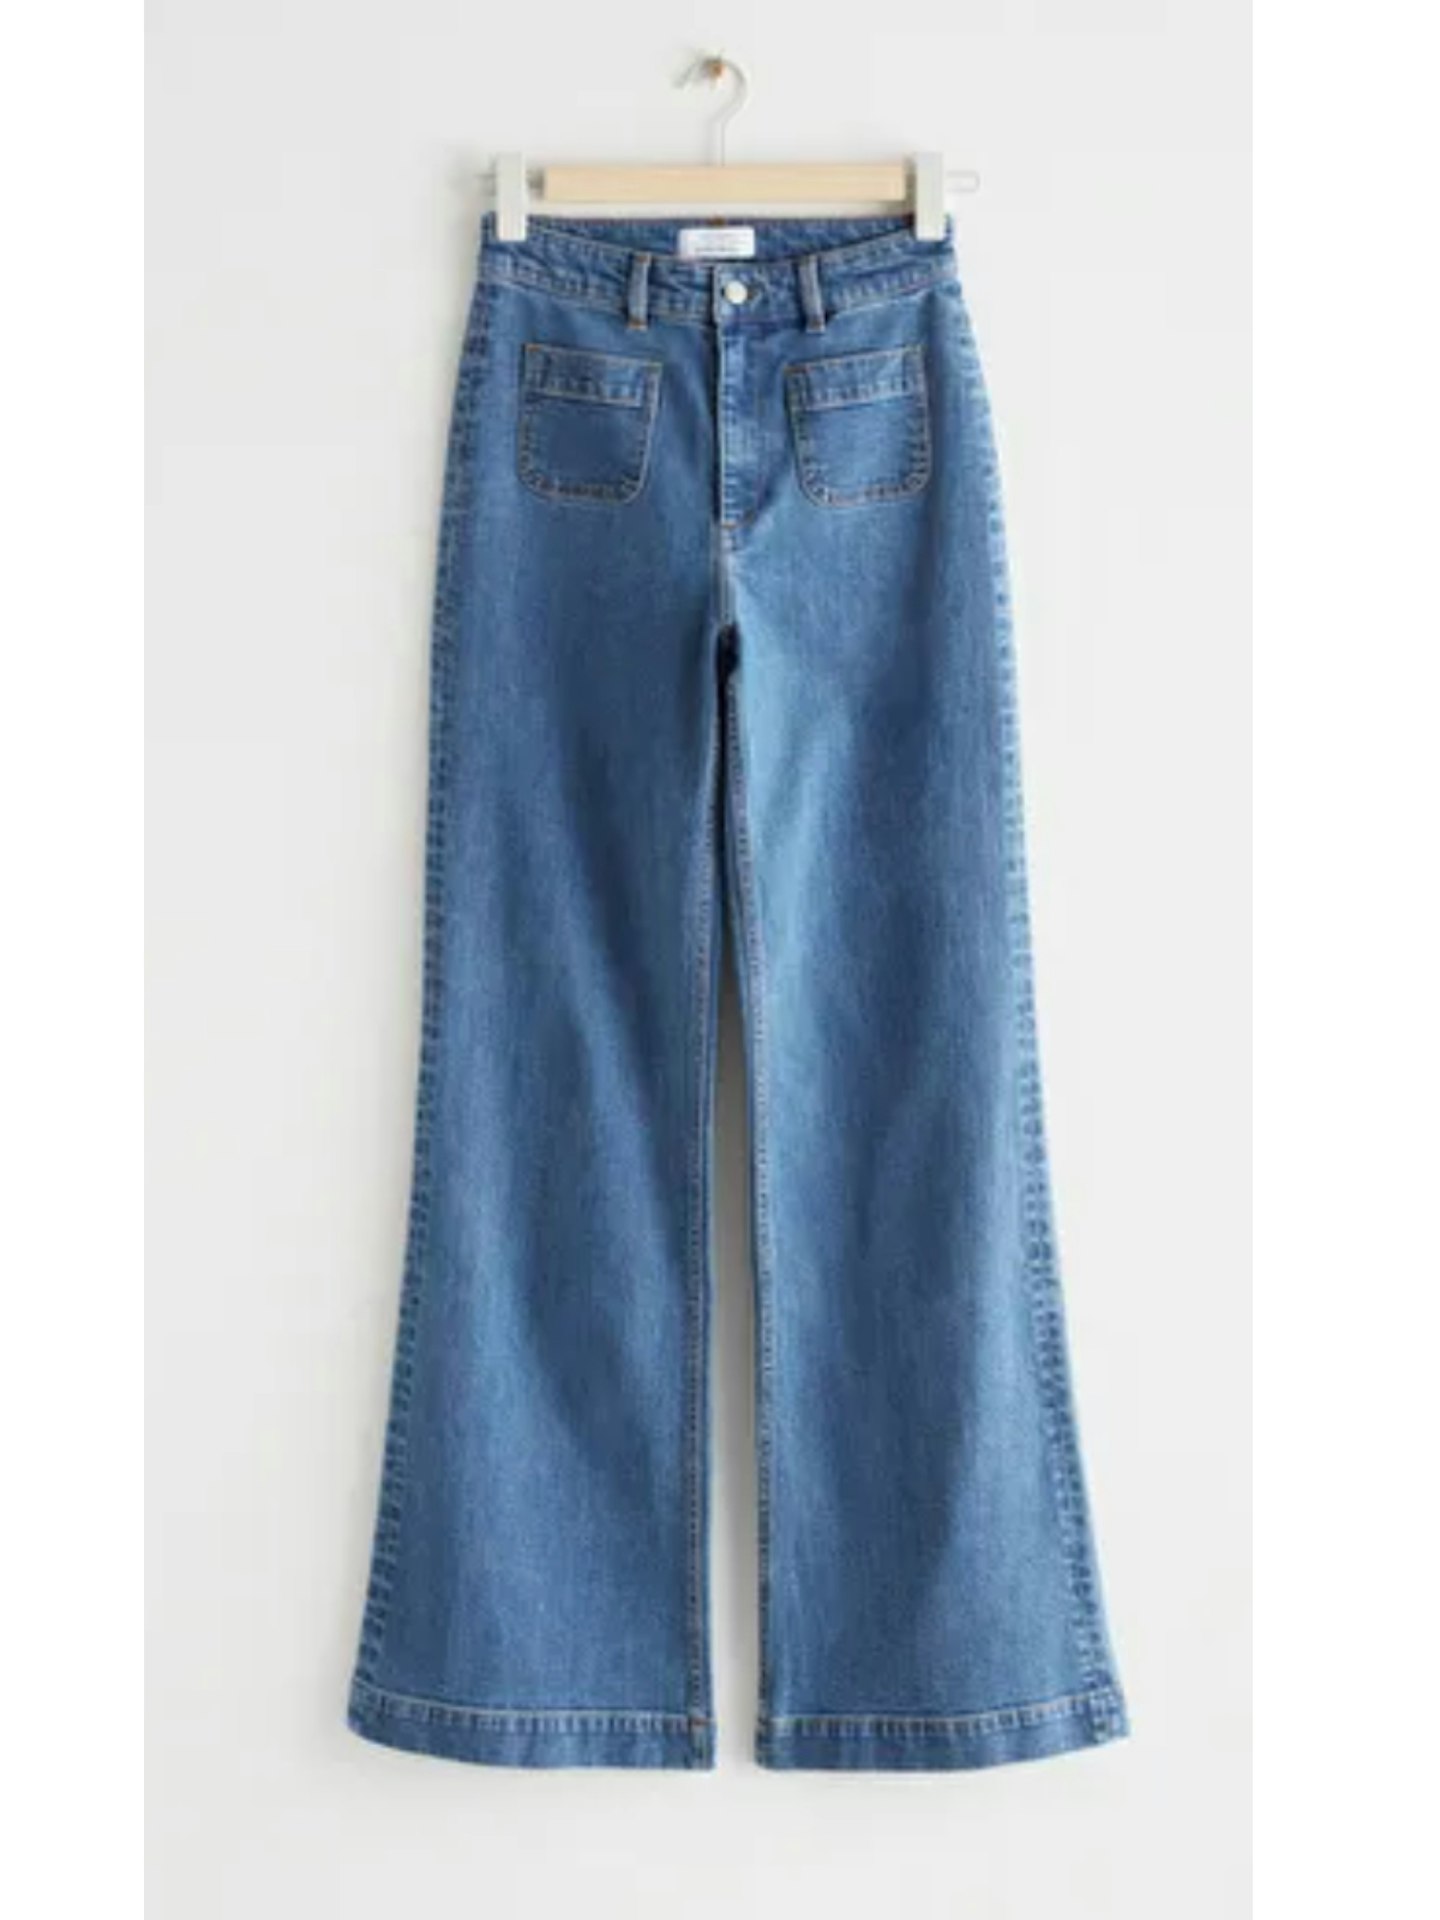 & Other Stories, Flared Buttoned Jeans